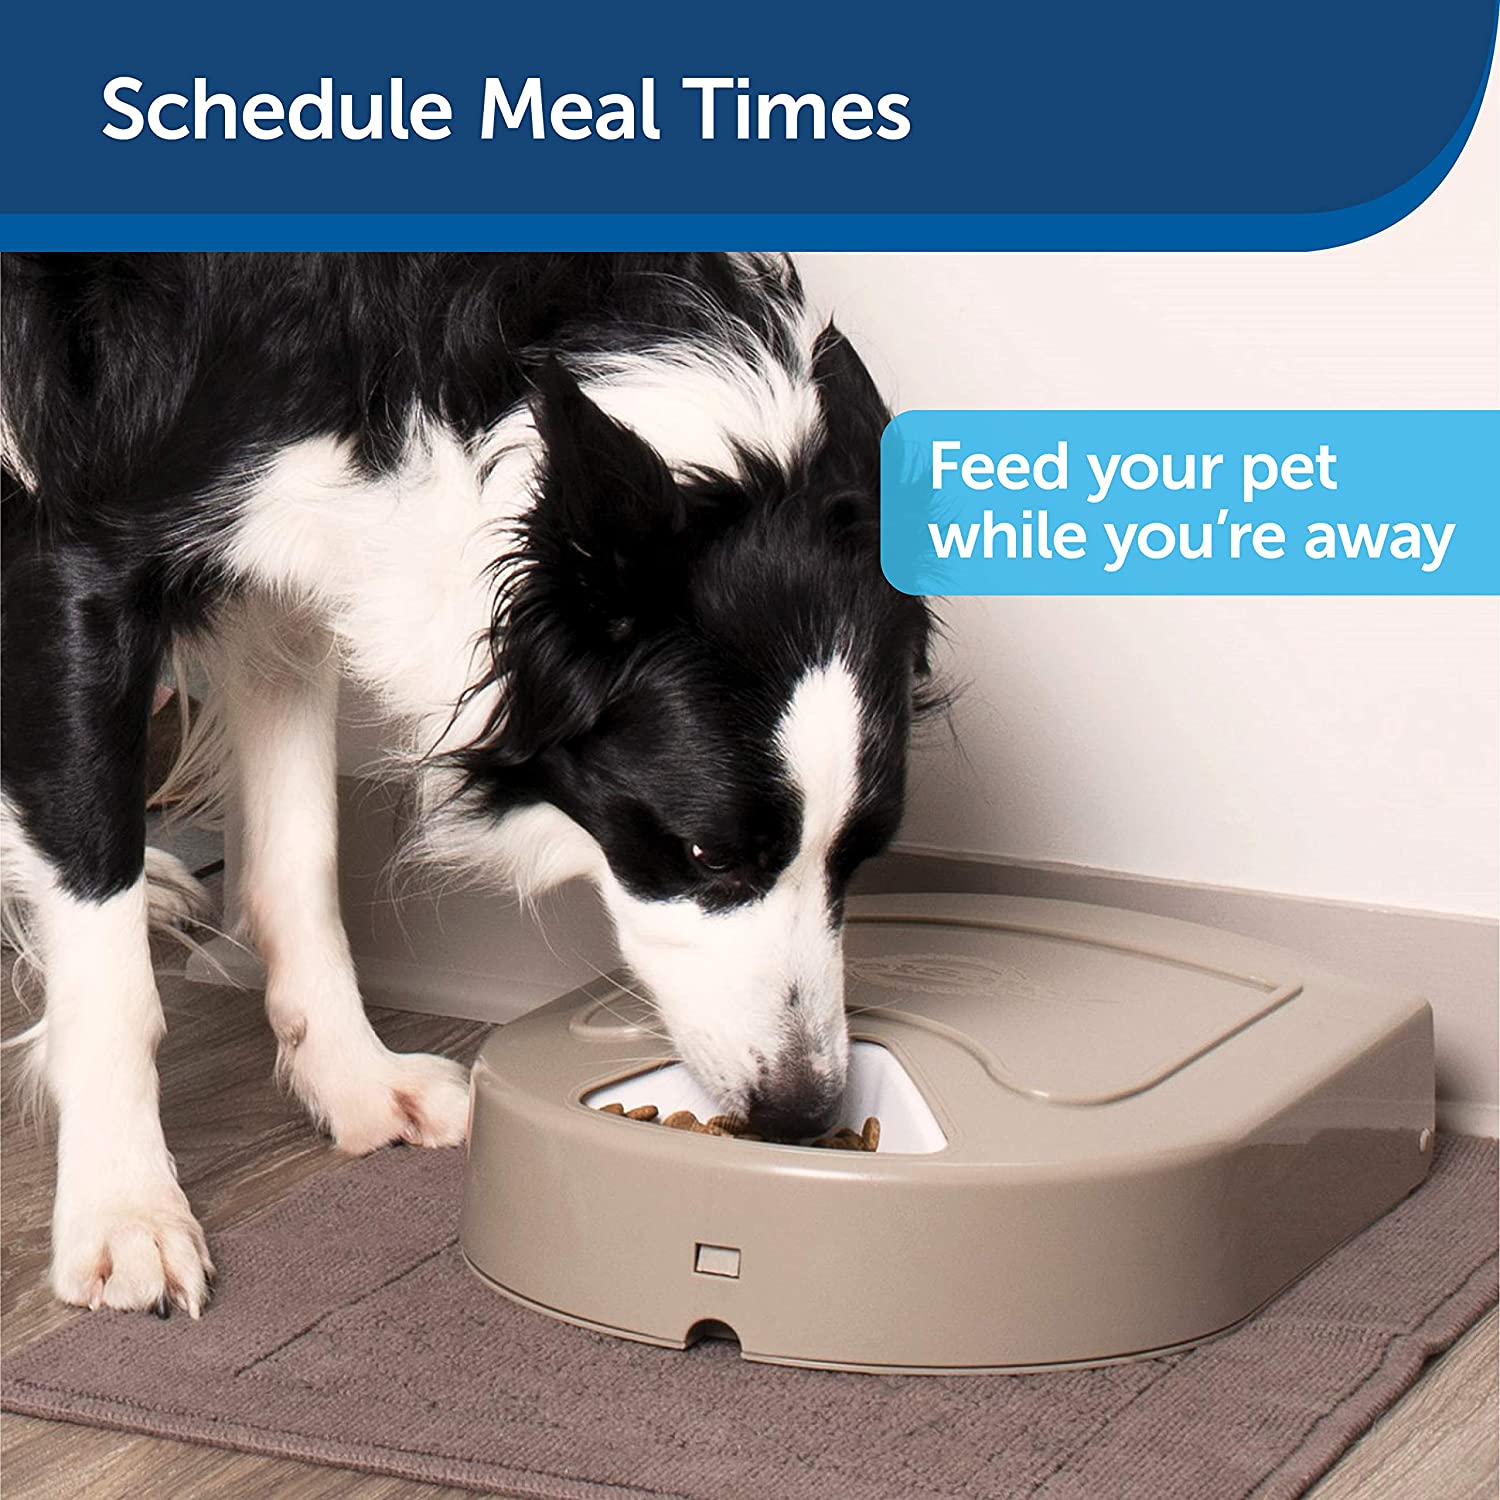 PetSafe 5 Meal Pet Feeder - Cat and Dog Feeder - Schedule 5 Meals with Digital Timer - 5 Cup Capacity